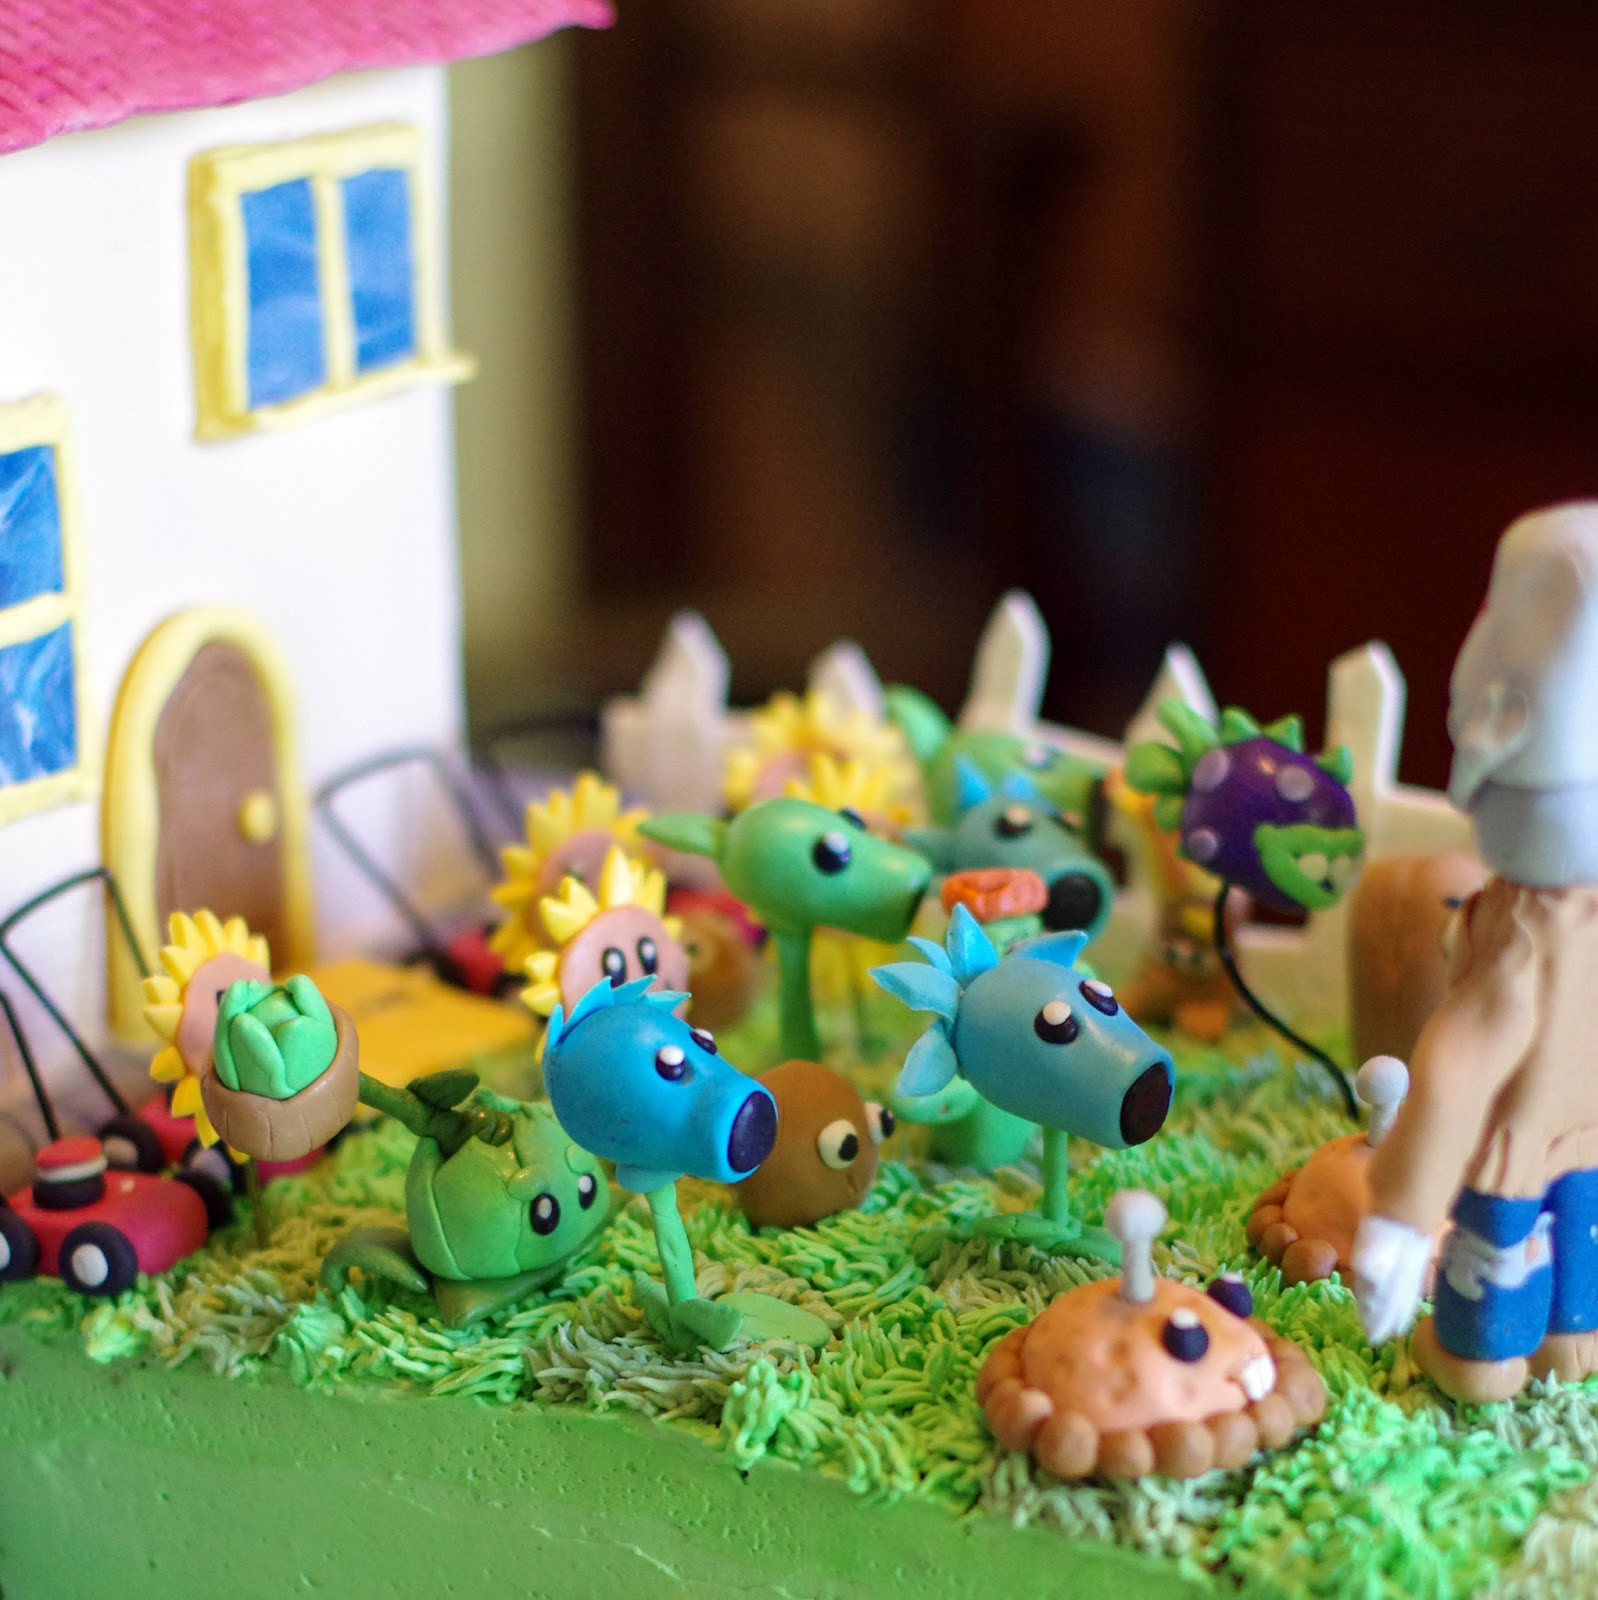 Plants Vs Zombies Birthday Cake
 Within the Kitchen Plants vs Zombies Birthday Party